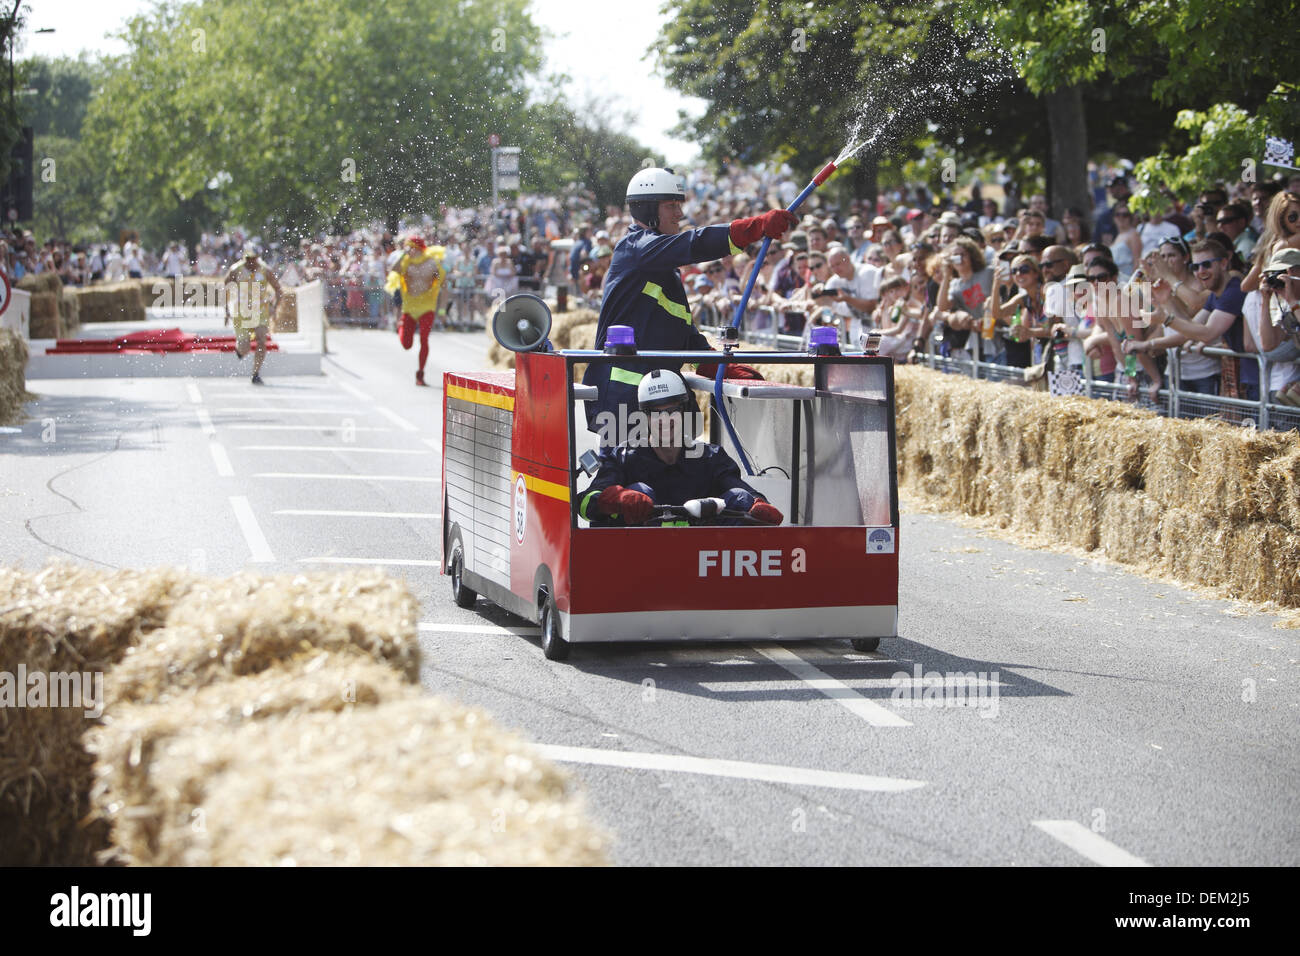 Red Bull Soapbox Race, held at Alexandra Palace in the Summer of 2013, in London, England Stock Photo